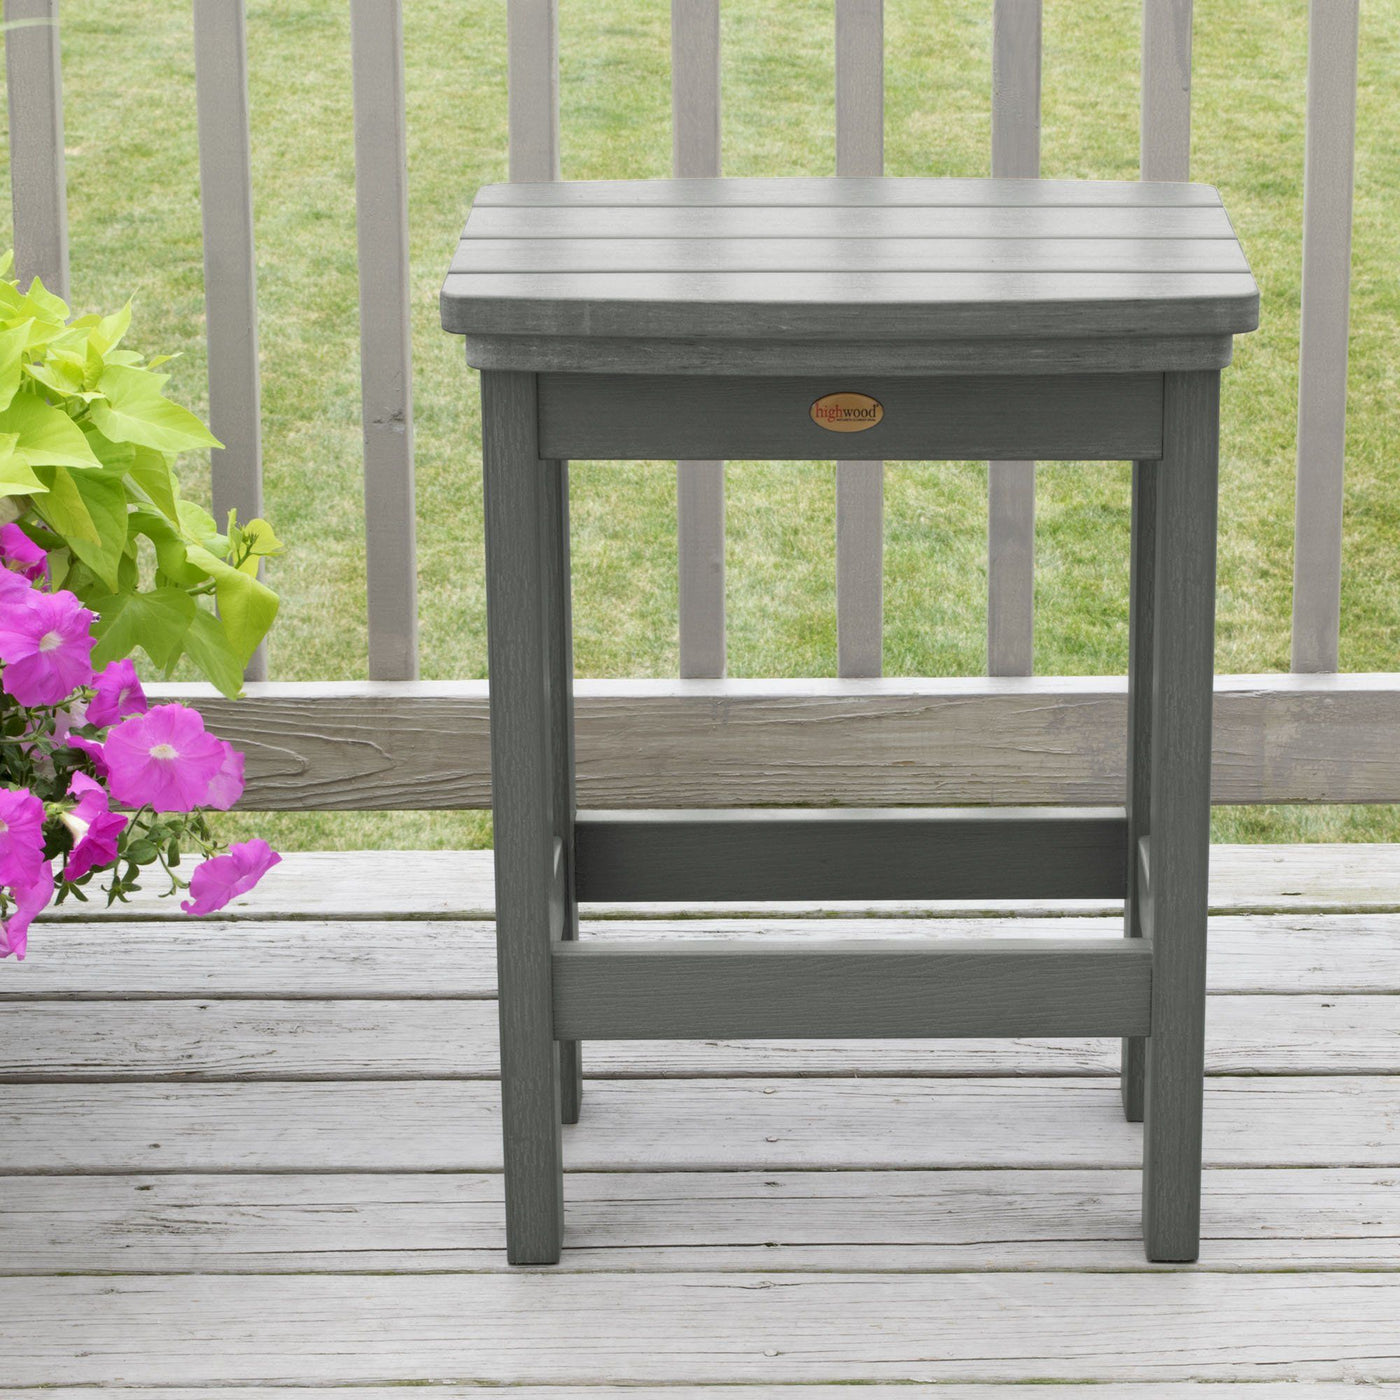 Gray Lehigh counter height stool on deck with flowers in background